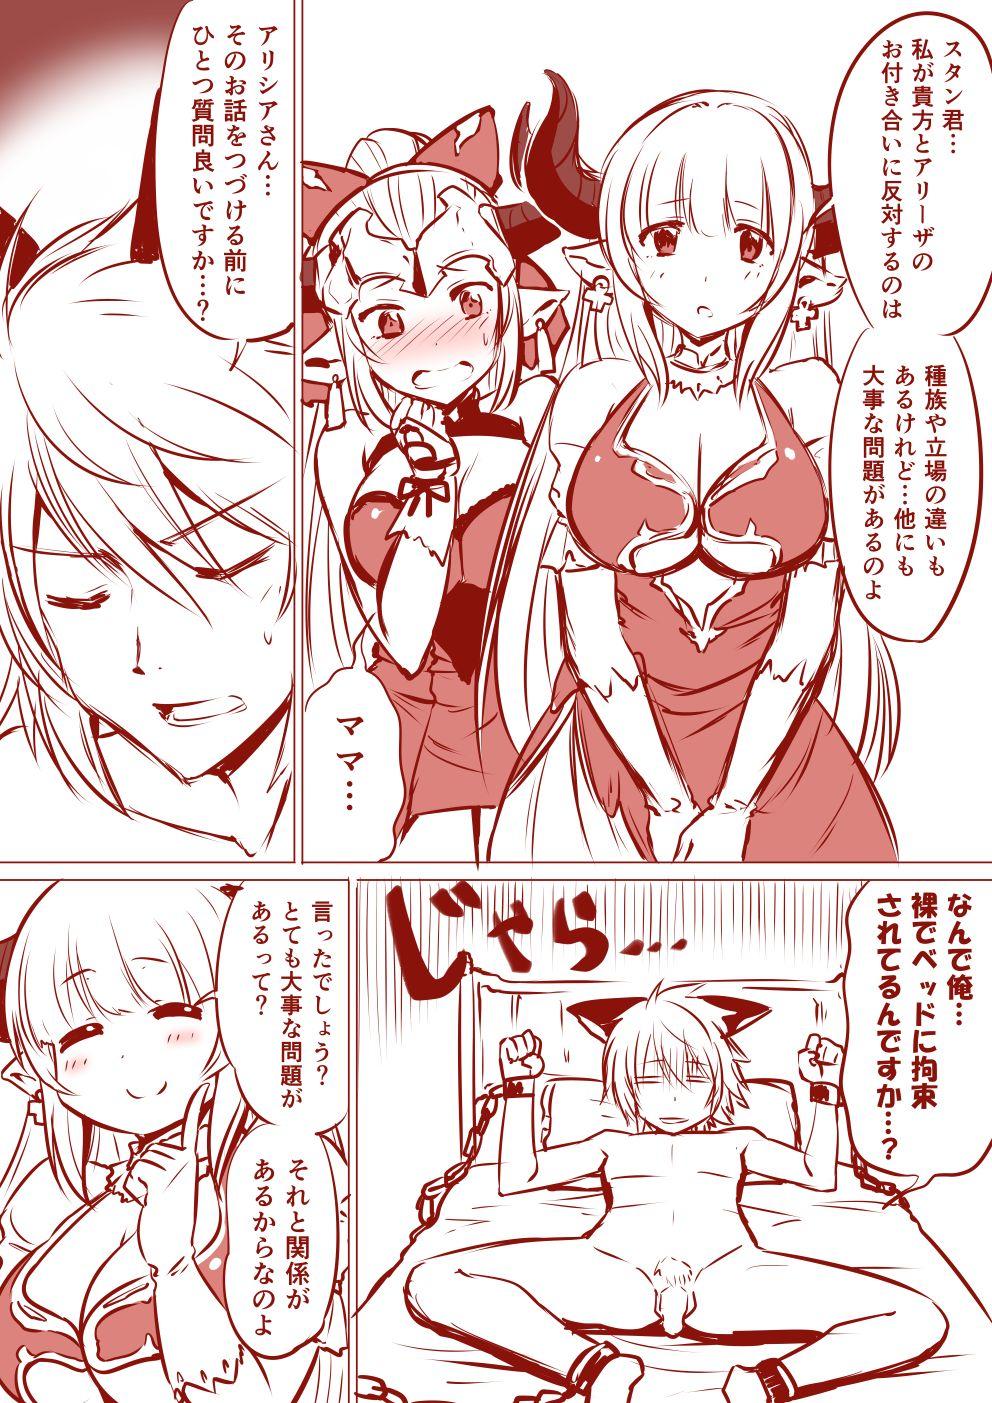 Thailand アリシアさんとアリーザちゃんのスタン君搾精漫画 - Granblue fantasy Wetpussy - Page 2